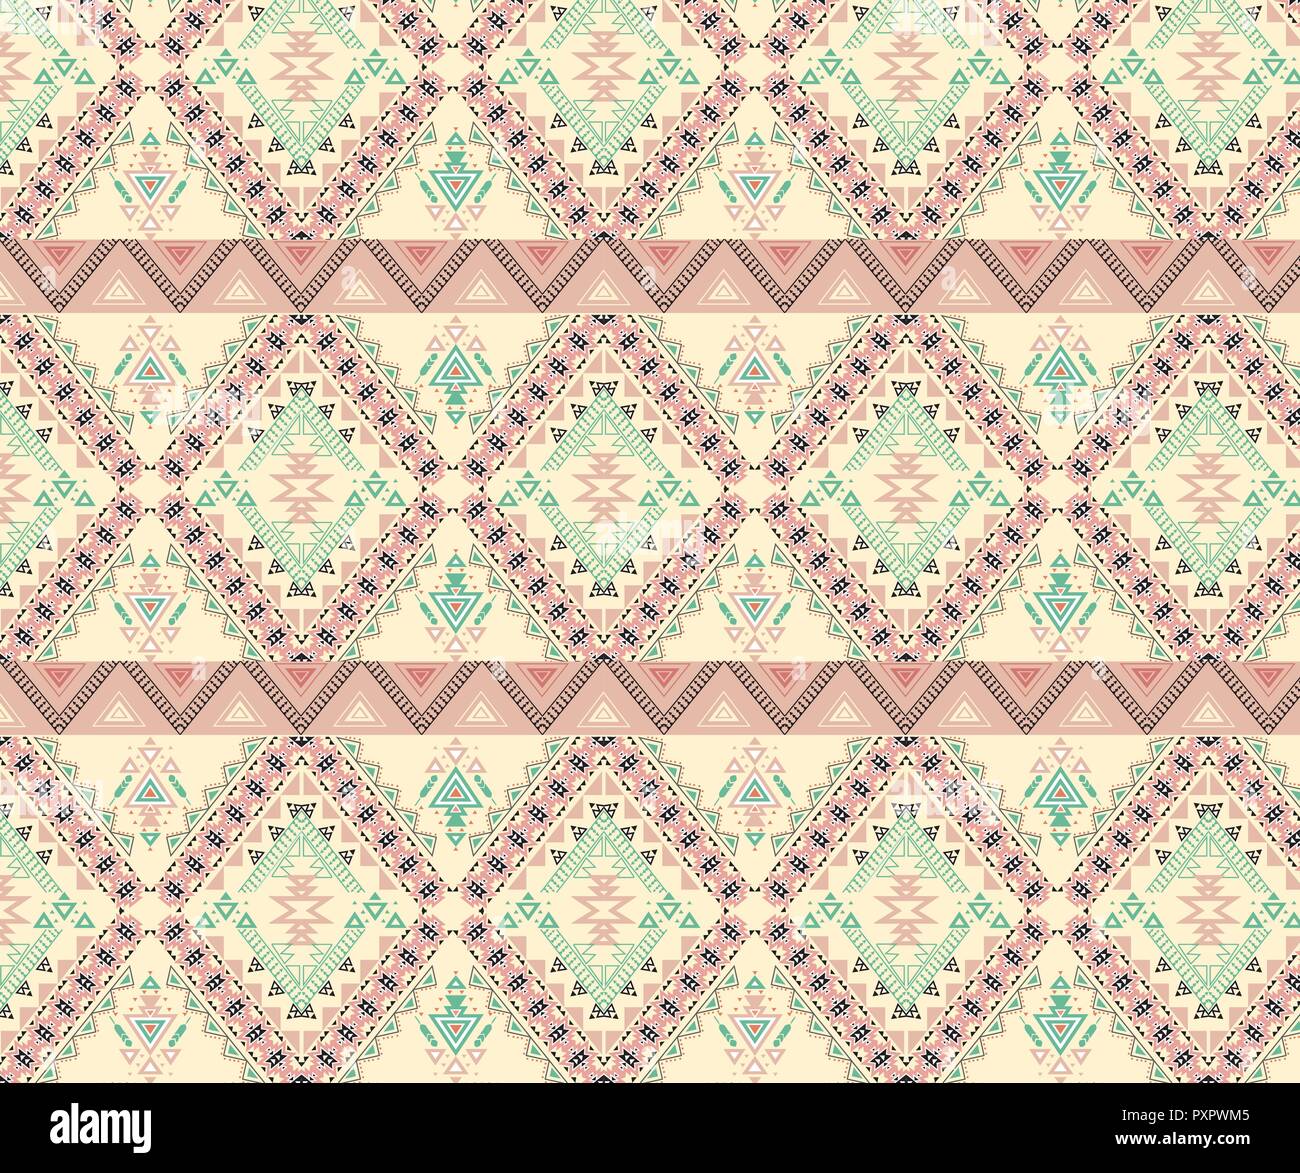 Vector Seamless Tribal Pattern. Stylish Art Ethnic Print Ornament with Triangles,. Stock Vector